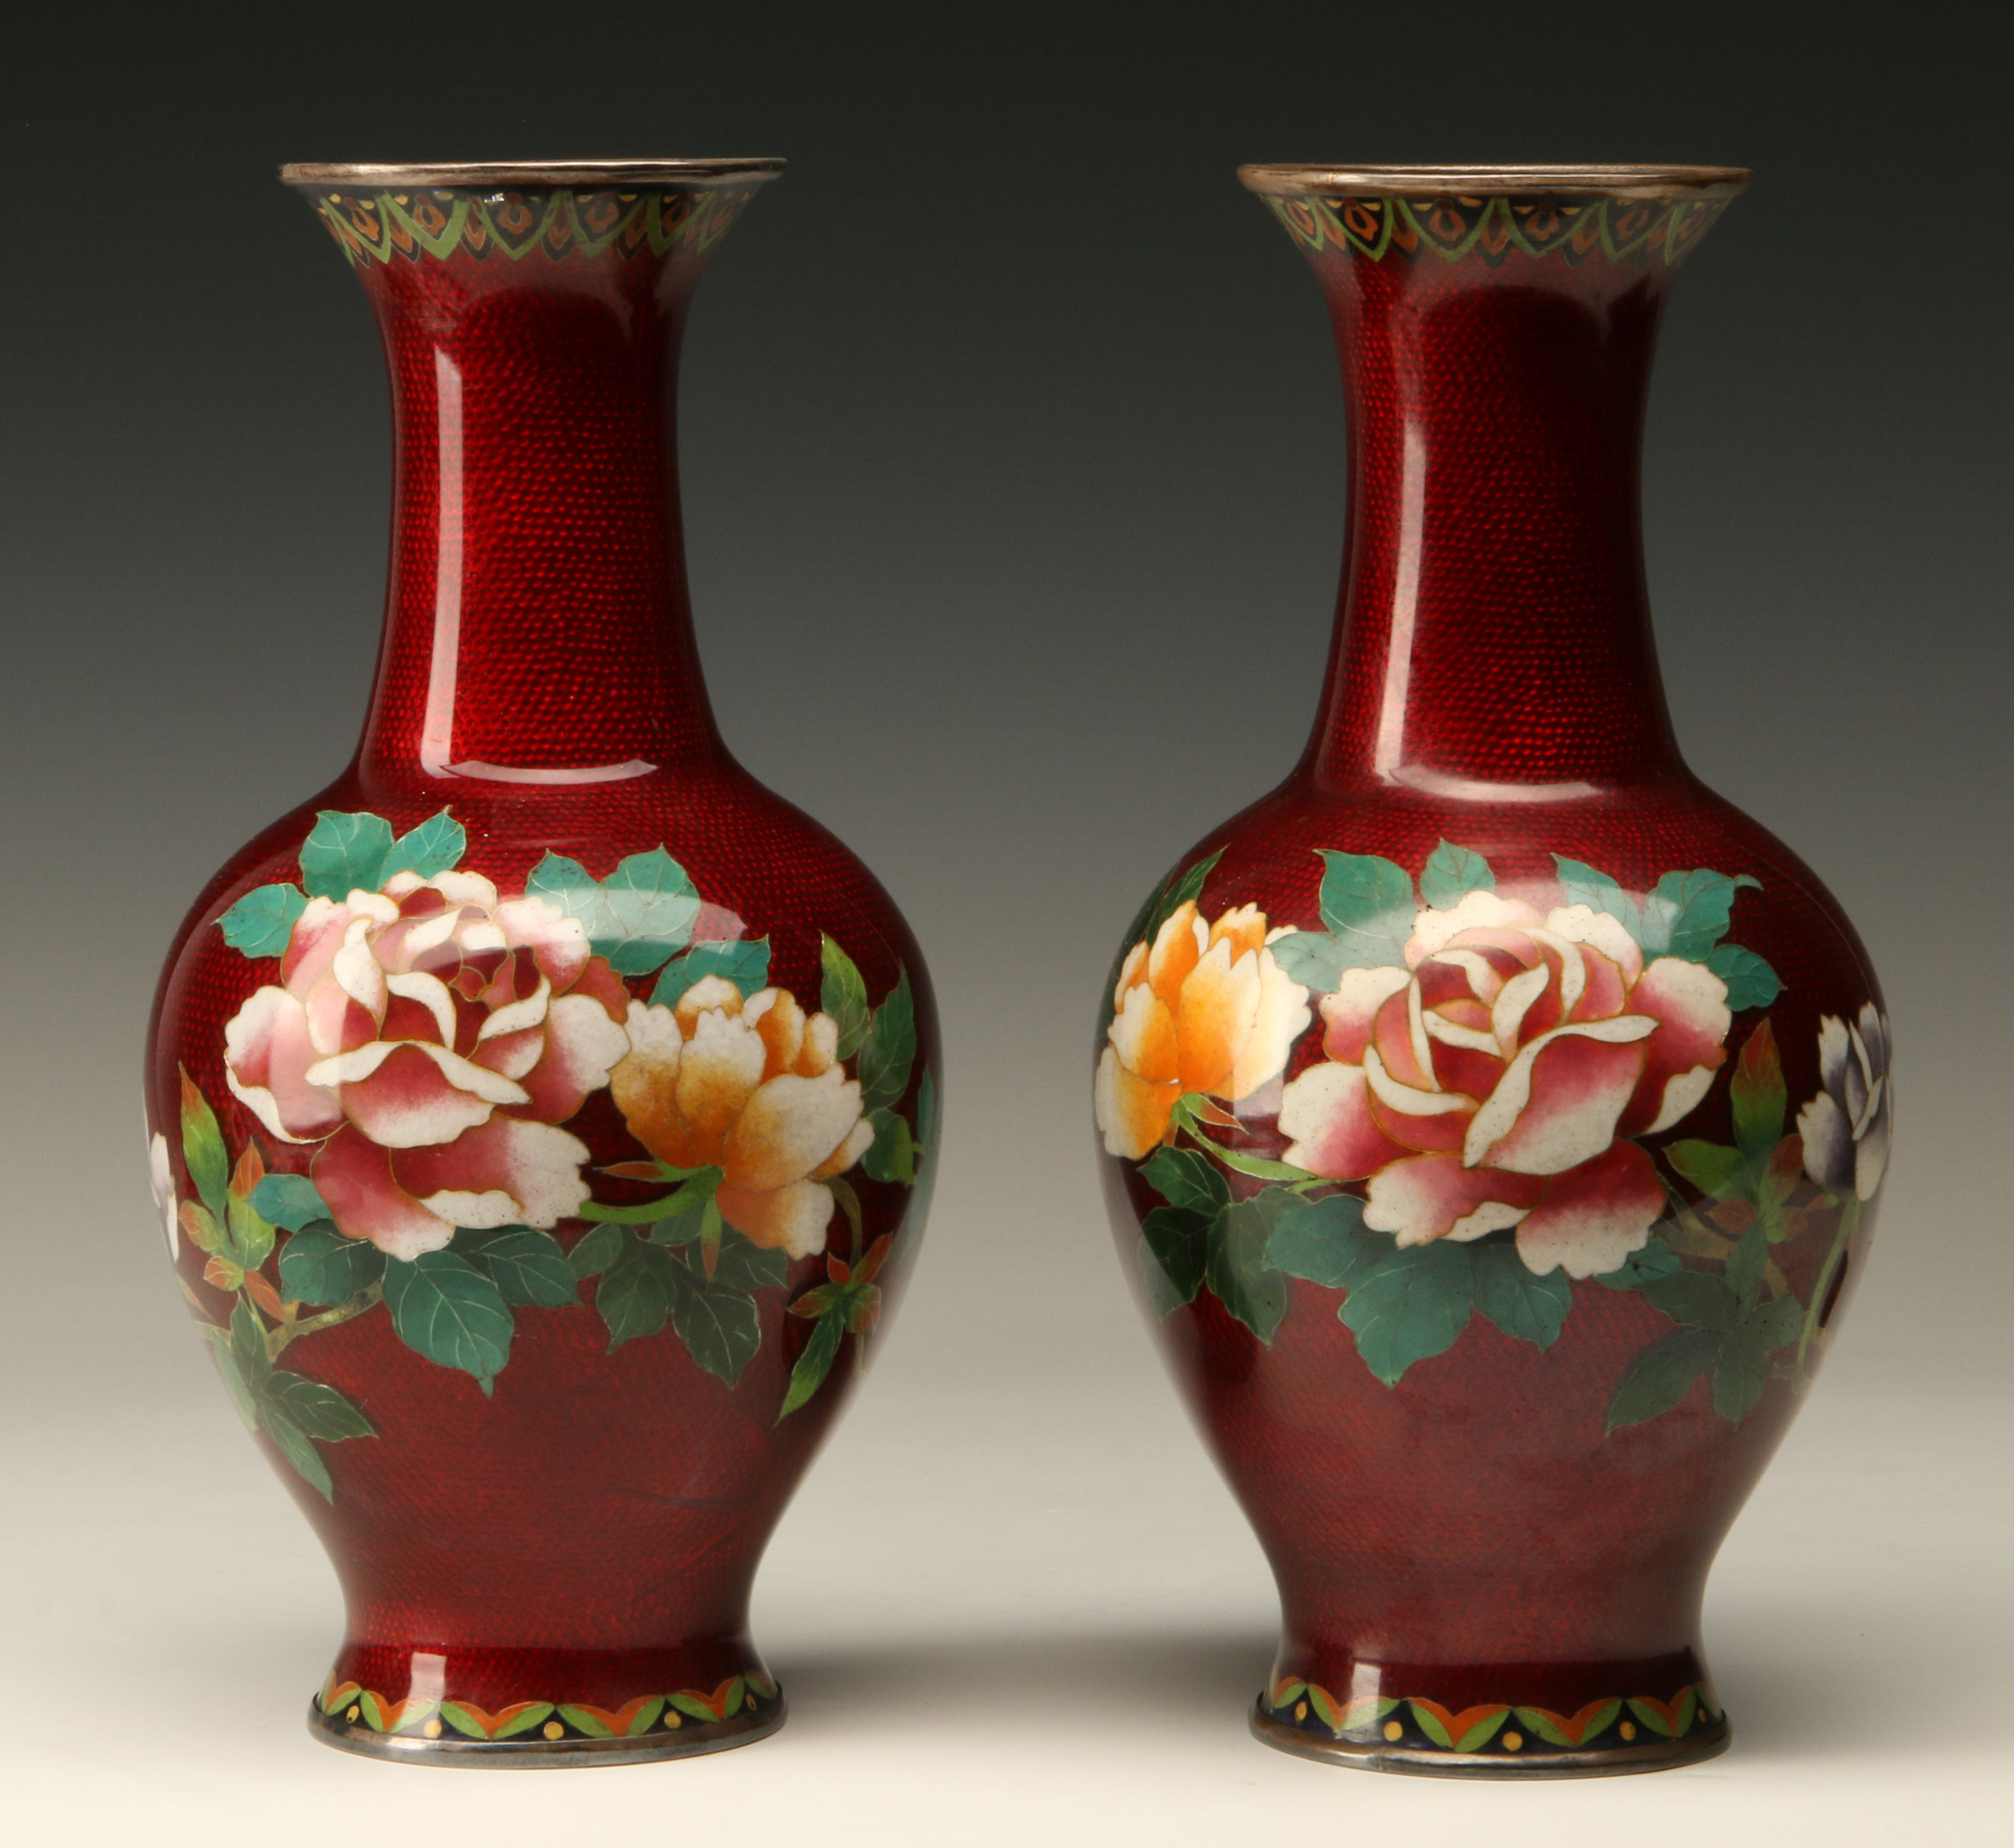 A PAIR OF JAPANESE RUBY RED CLOISONNE VASES